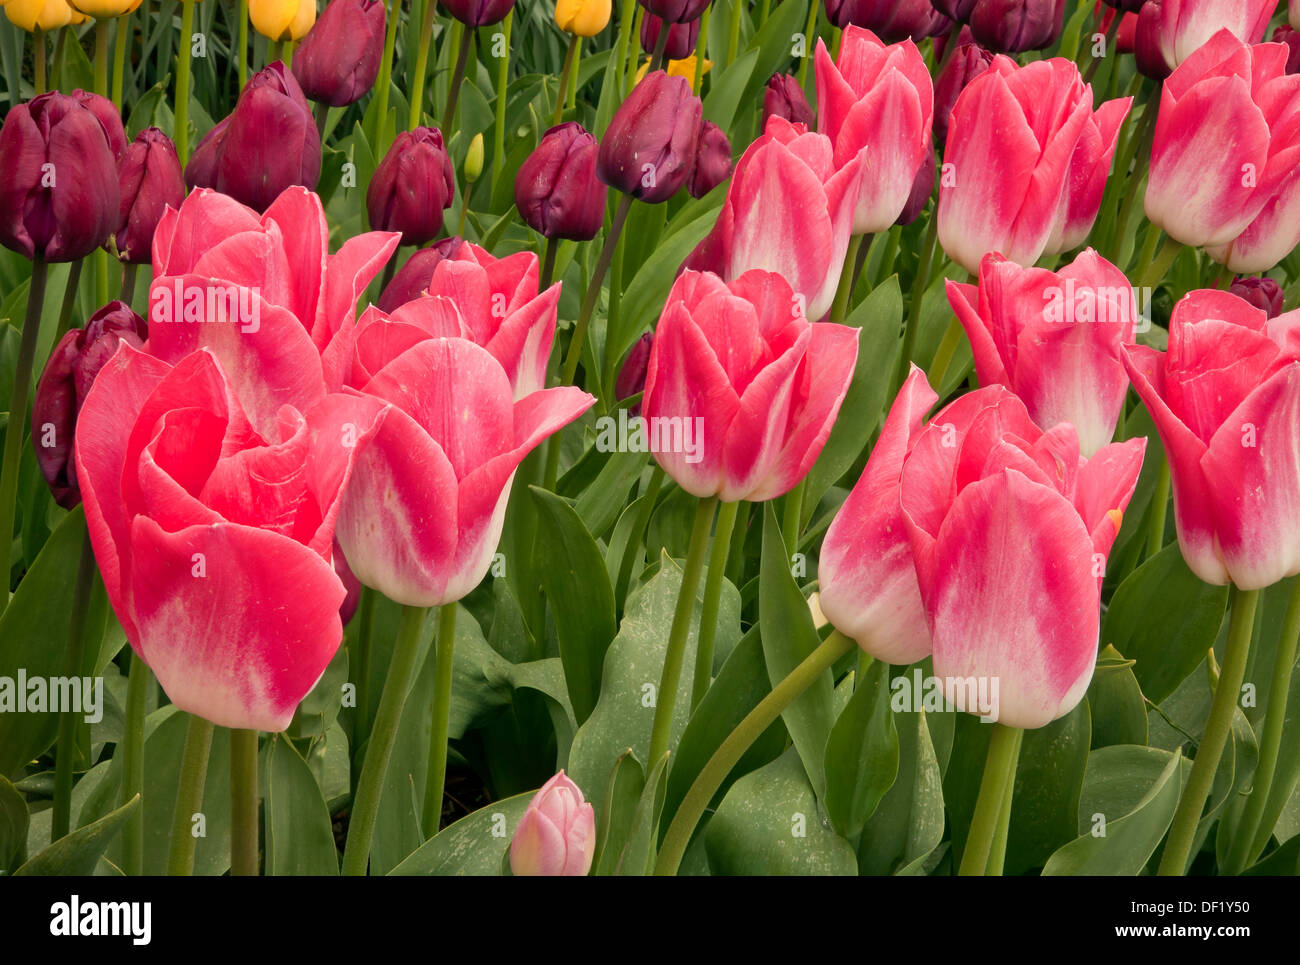 WASHINGTON - Tulips blooming in a display garden at RoozenGaarde Bulb Farm in the Skagit Valley near Mount Vernon. Stock Photo